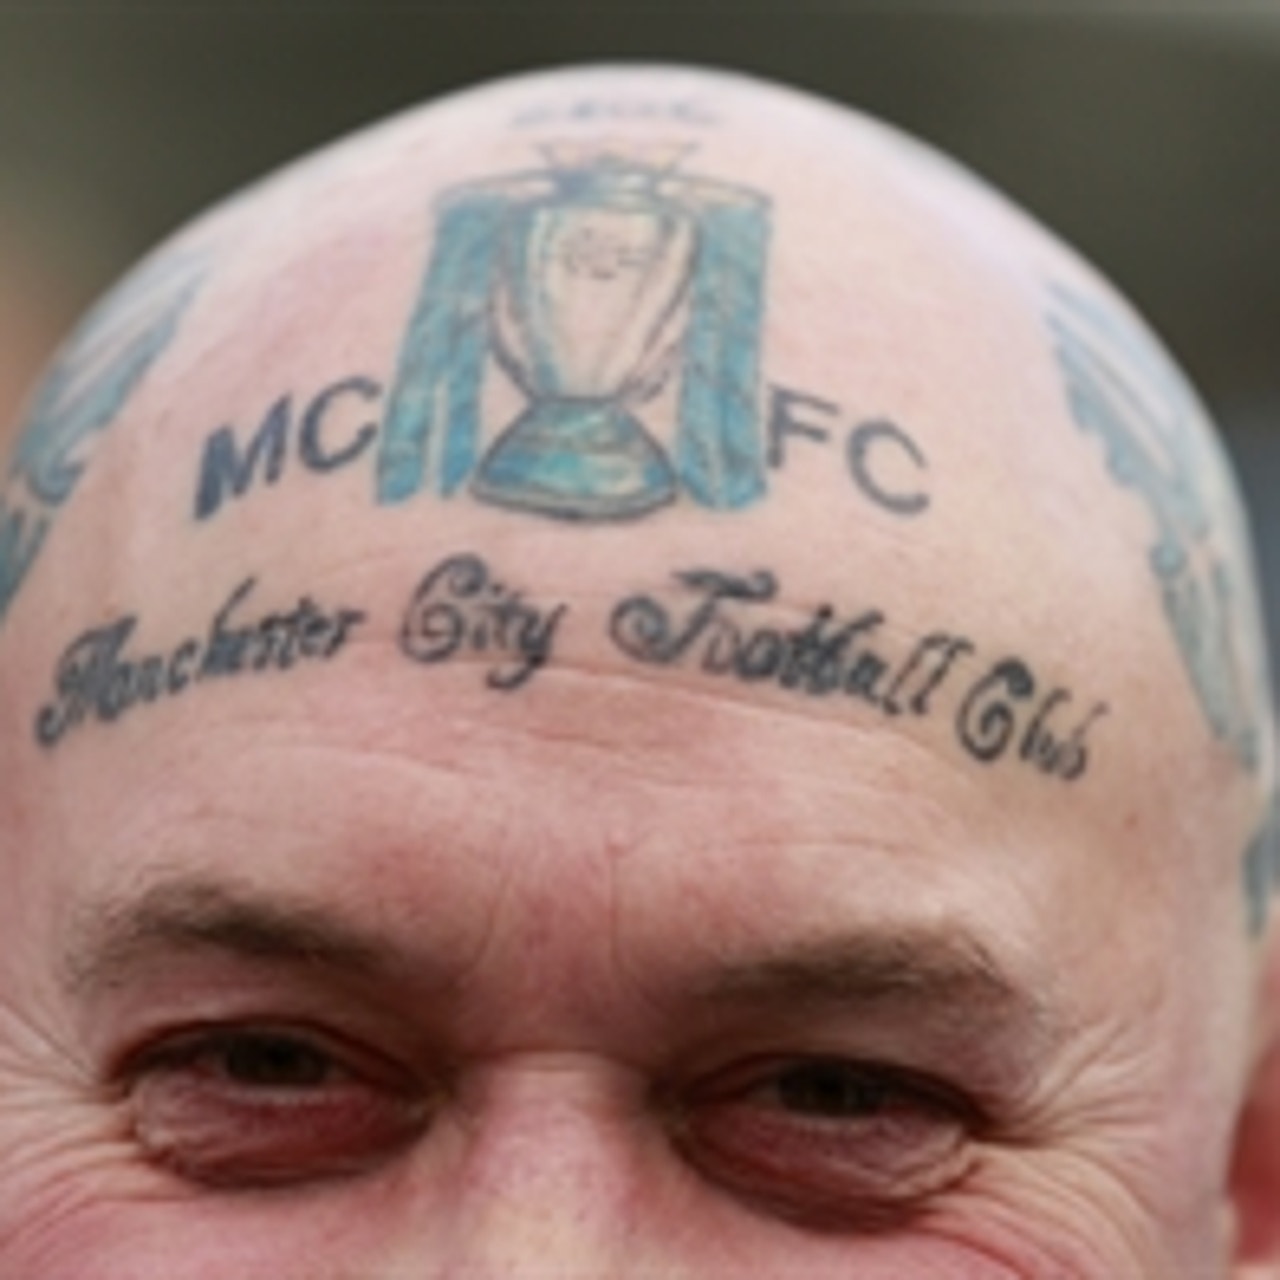 Man City could offer fans free tattoo removal | FOX Sports